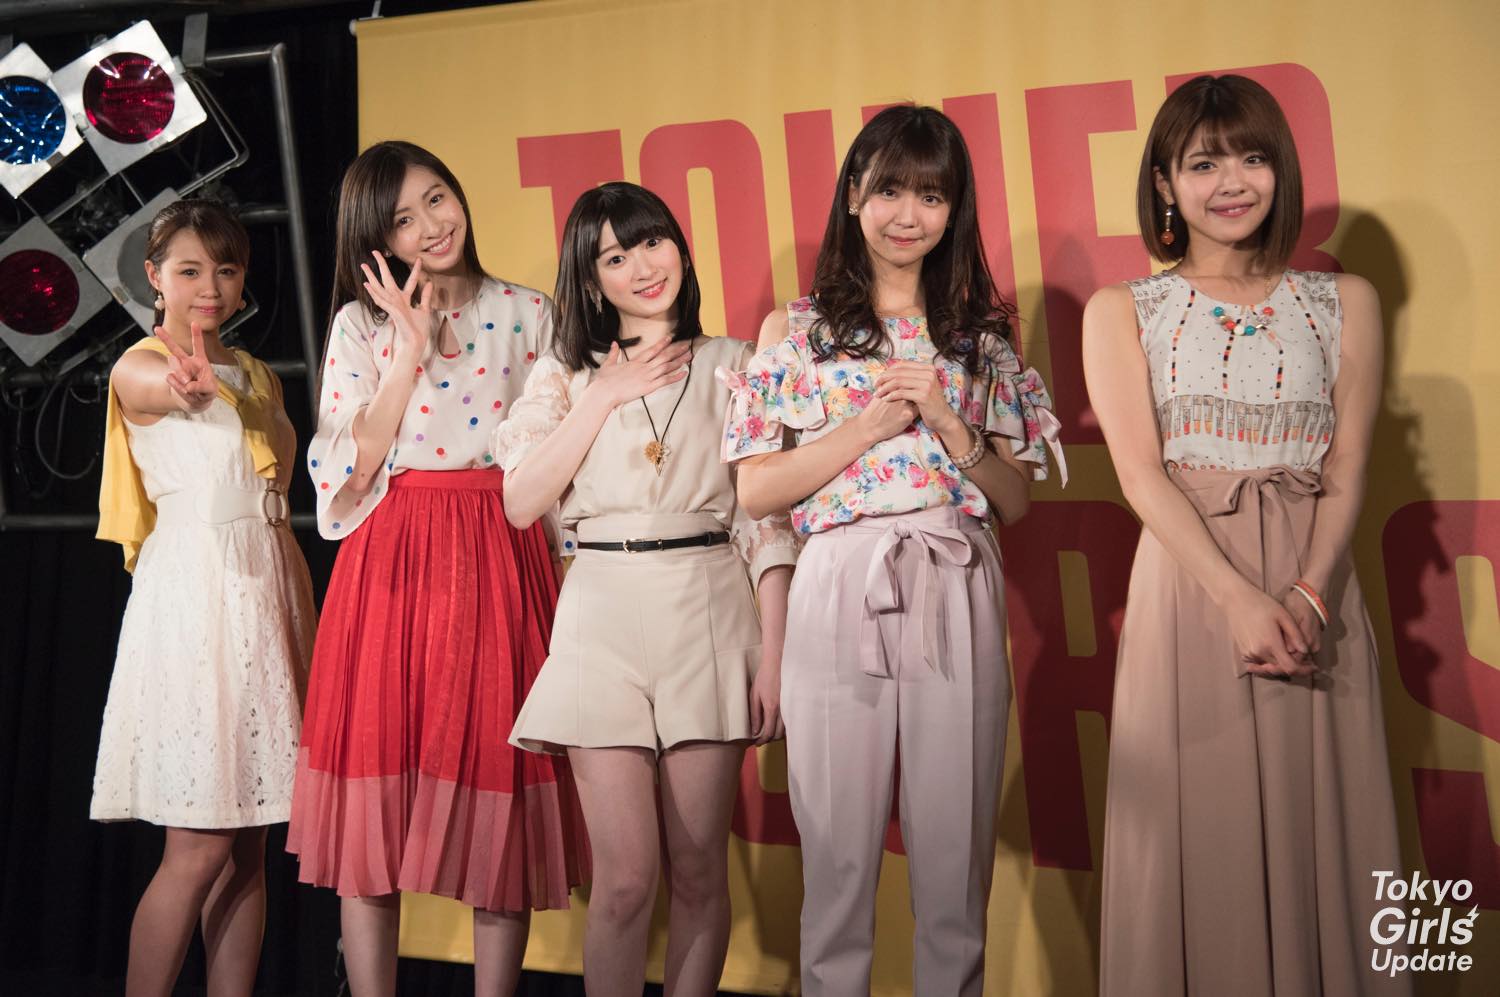 Juice=Juice Can’t Wait to “Jidanda Dance” With Fans All Over The World!